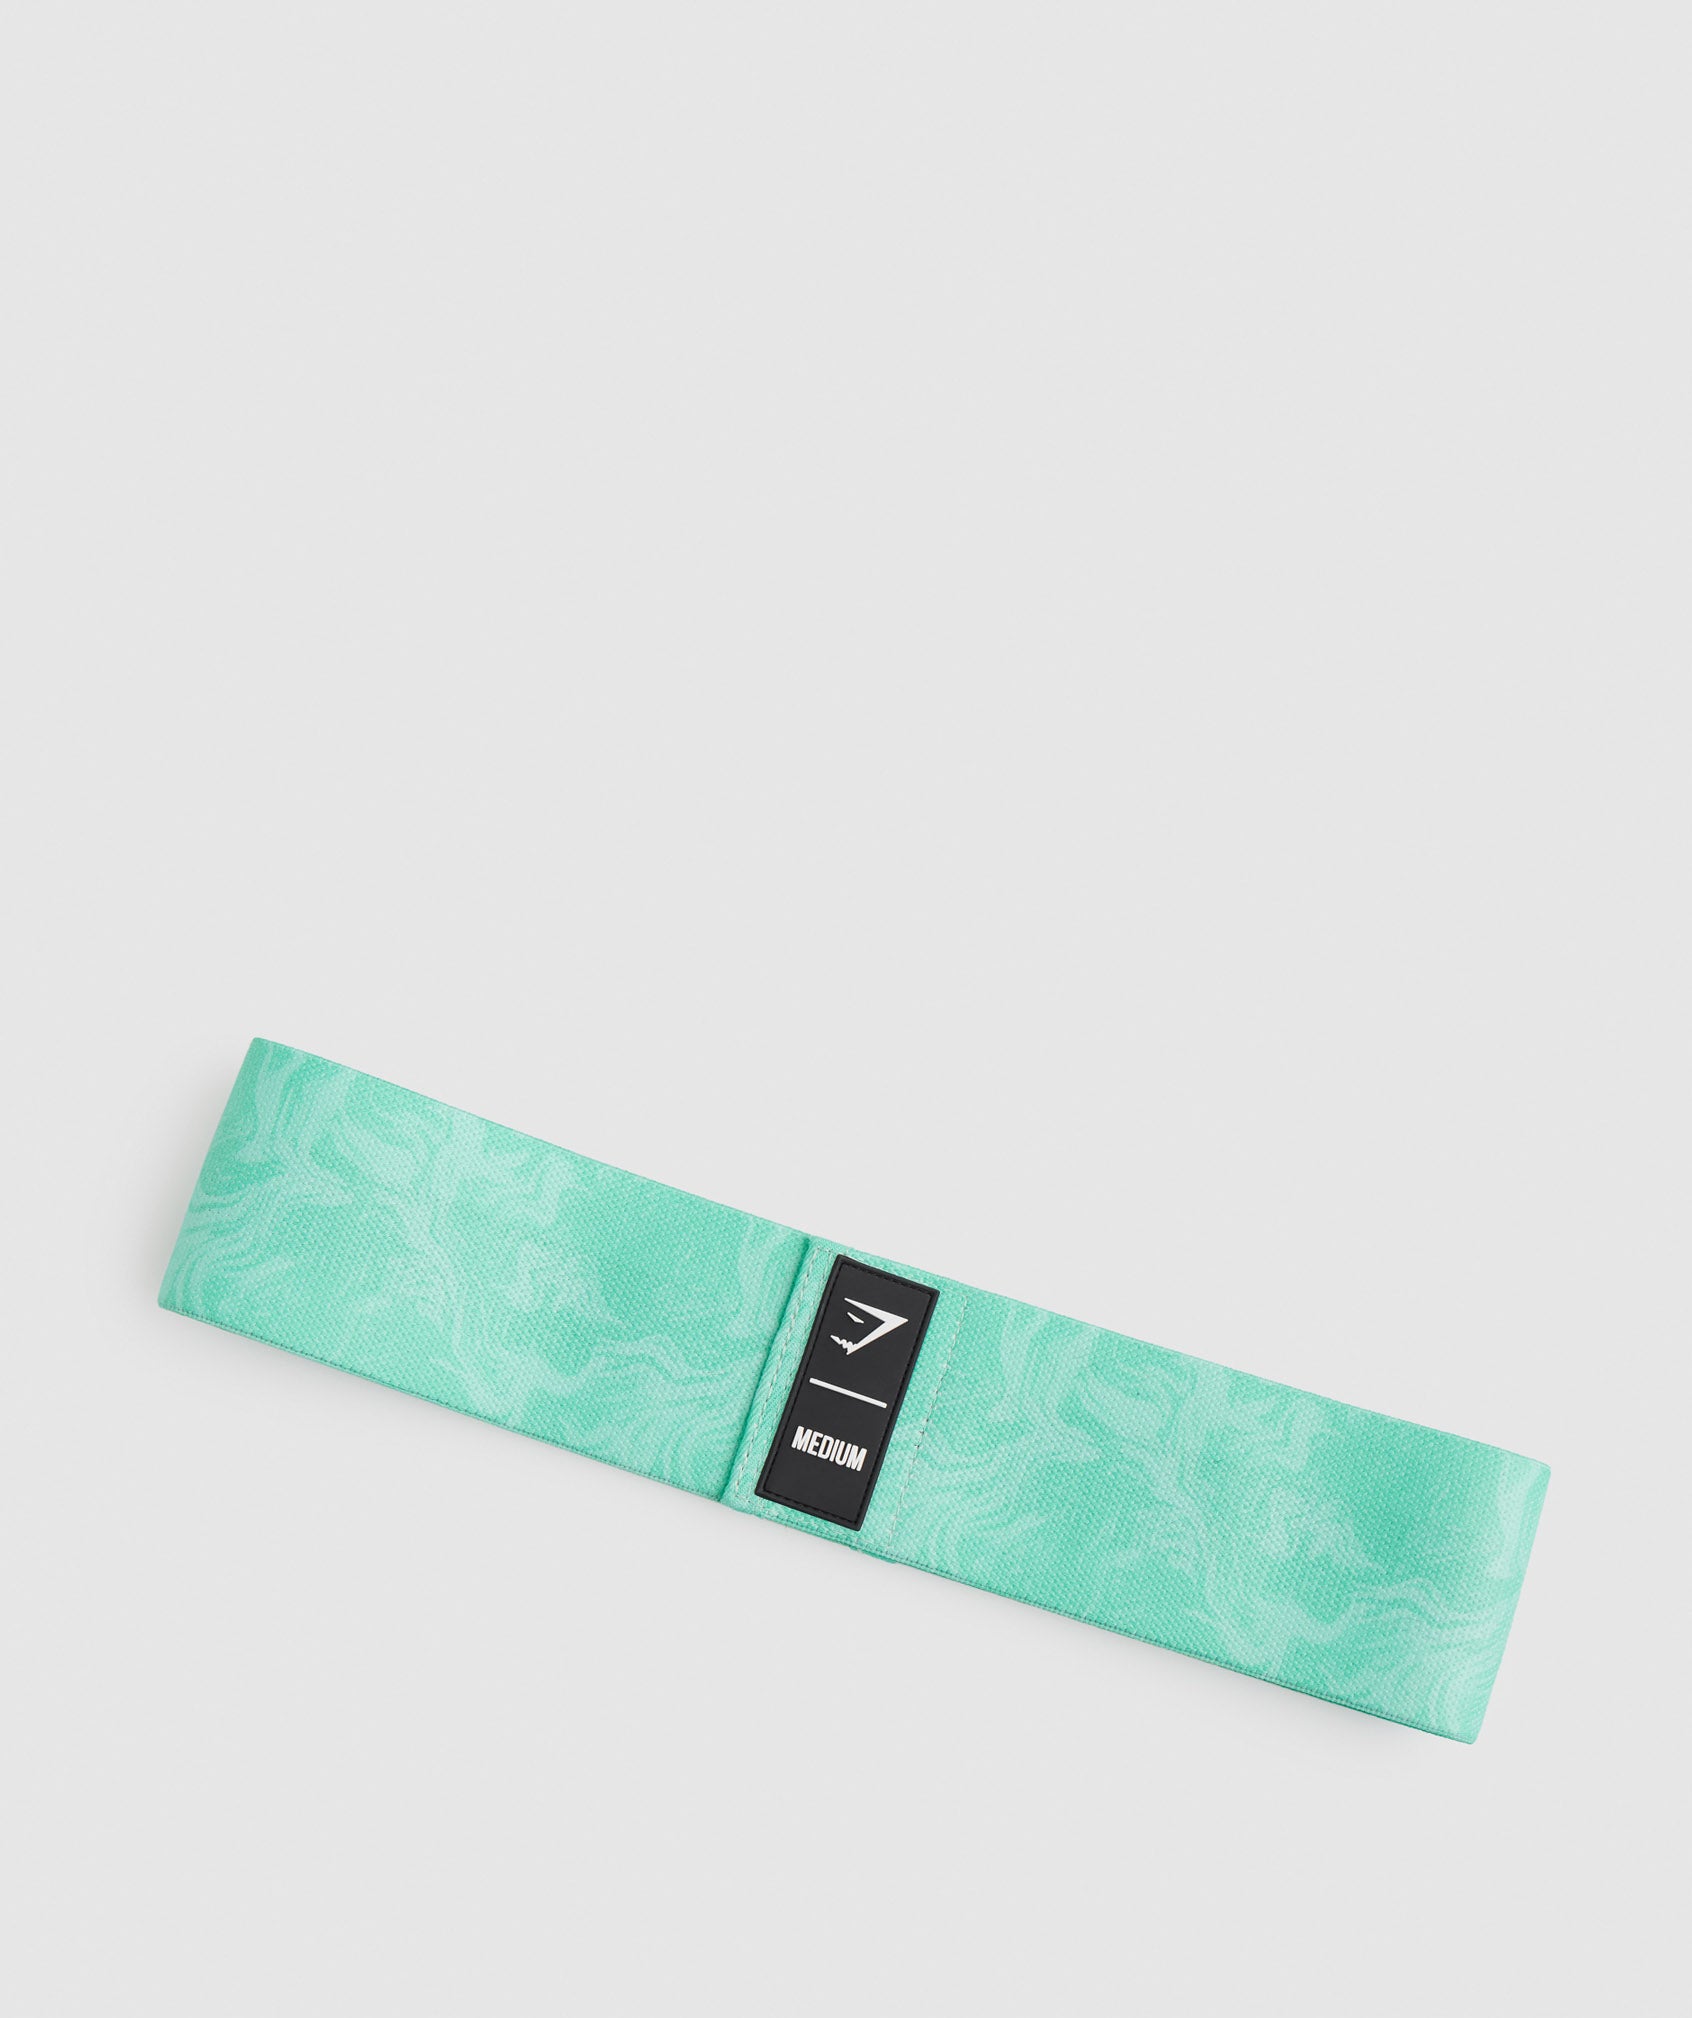 Medium Glute Band in Bright Turquoise Print - view 1